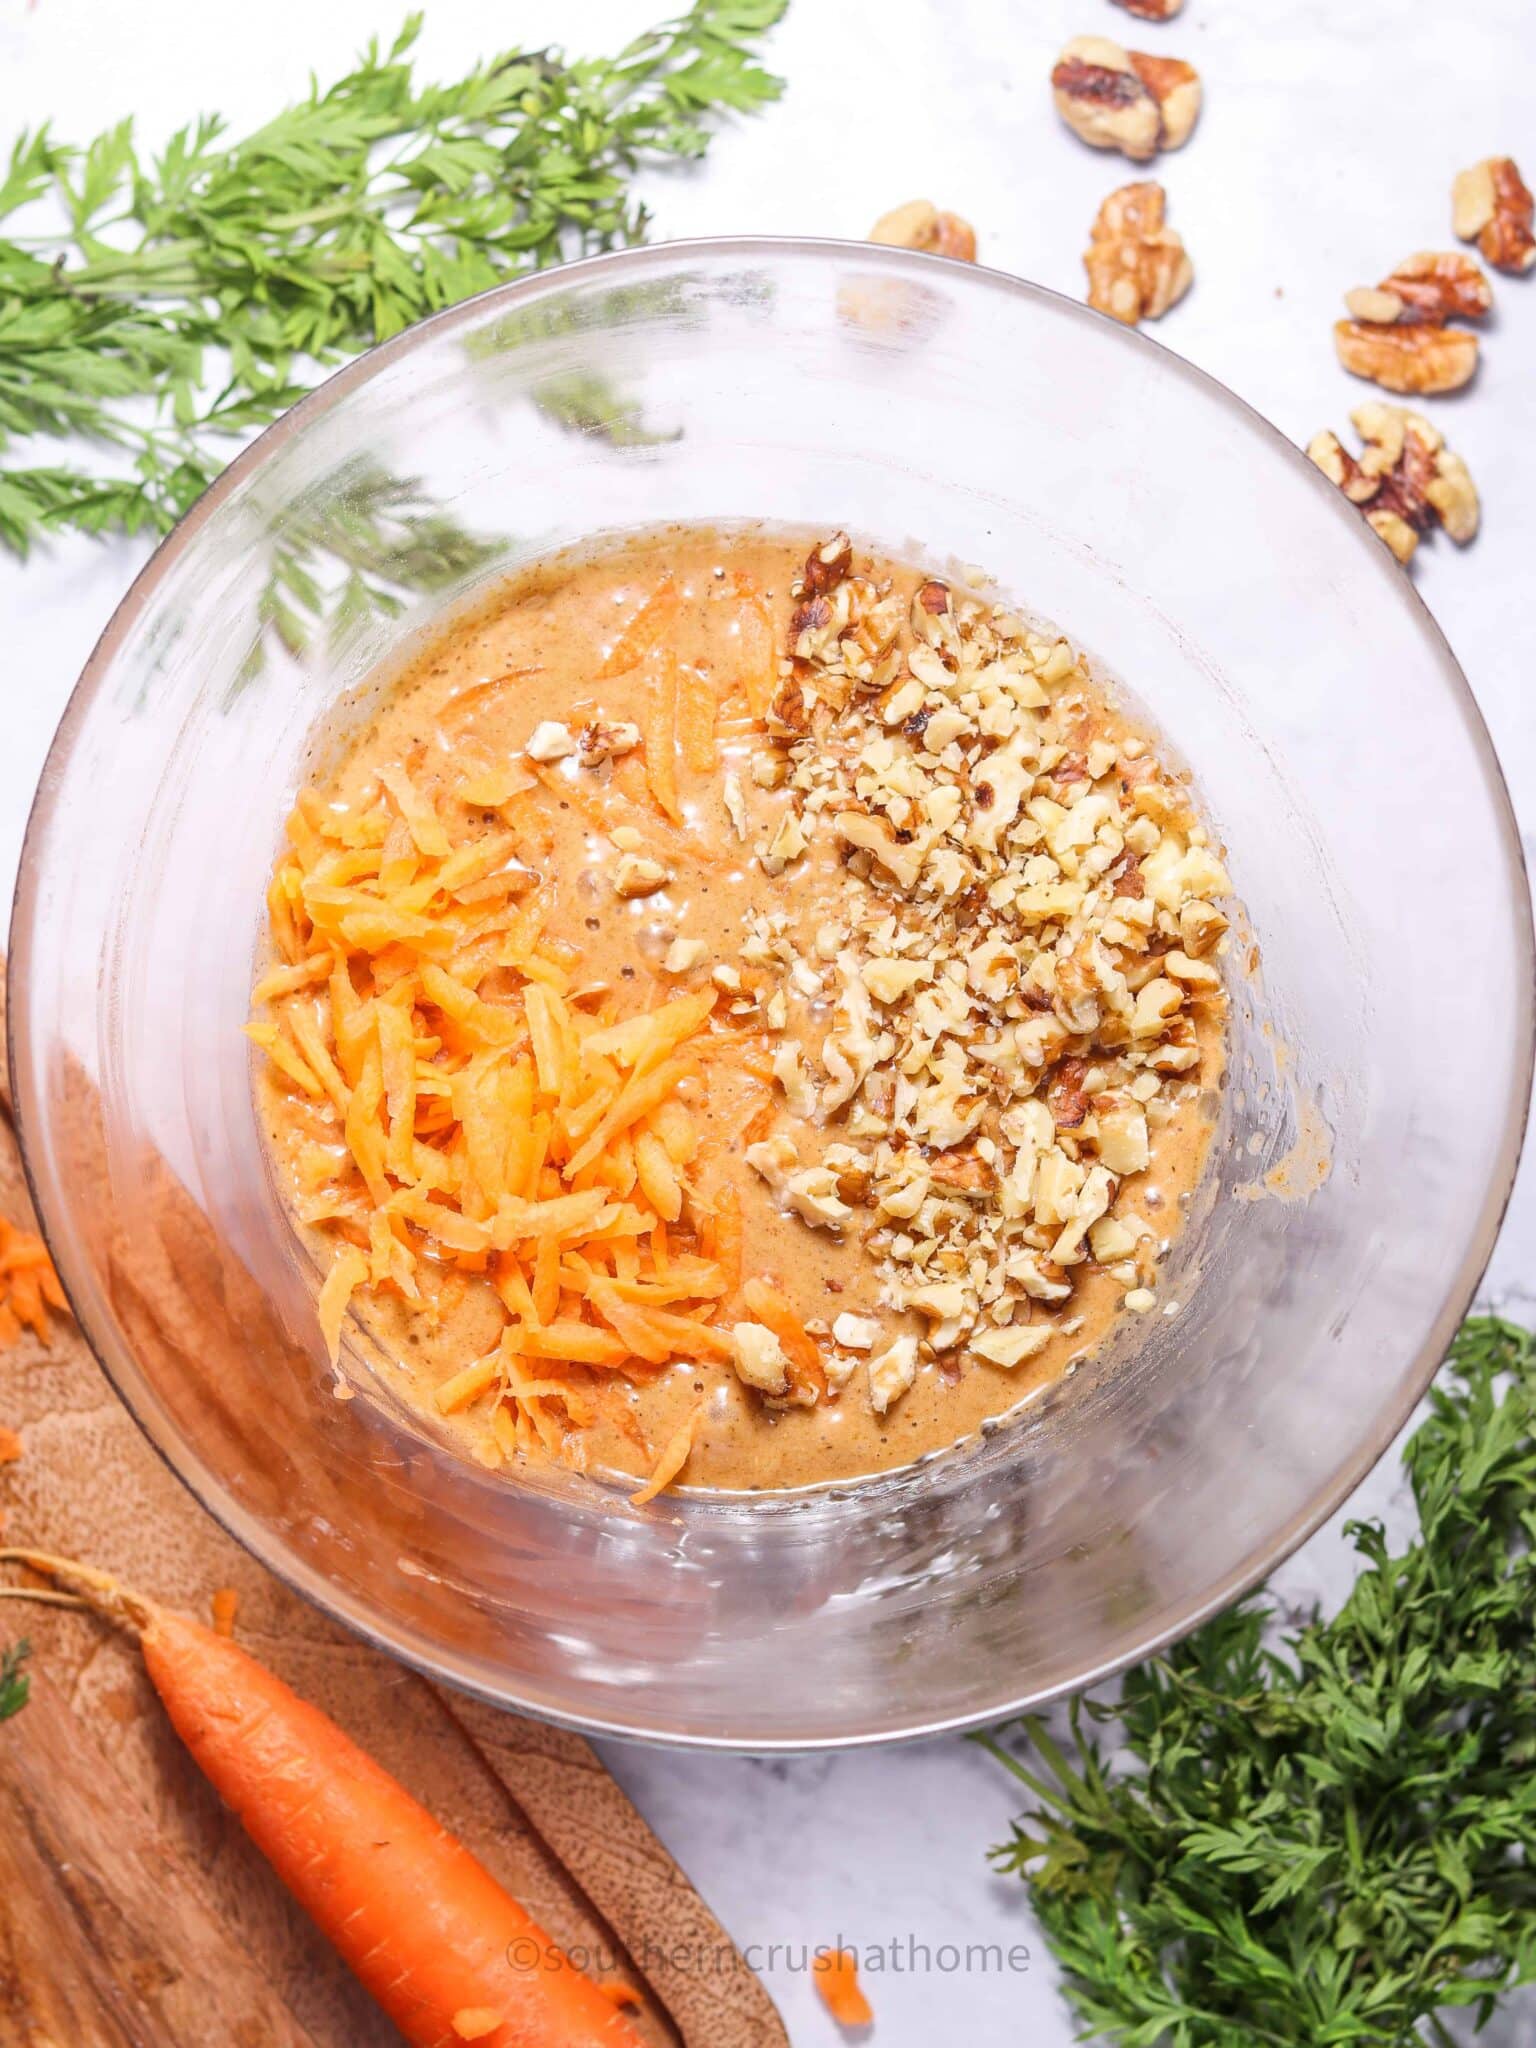 carrots and walnuts in mixing bowl with carrot cake batter